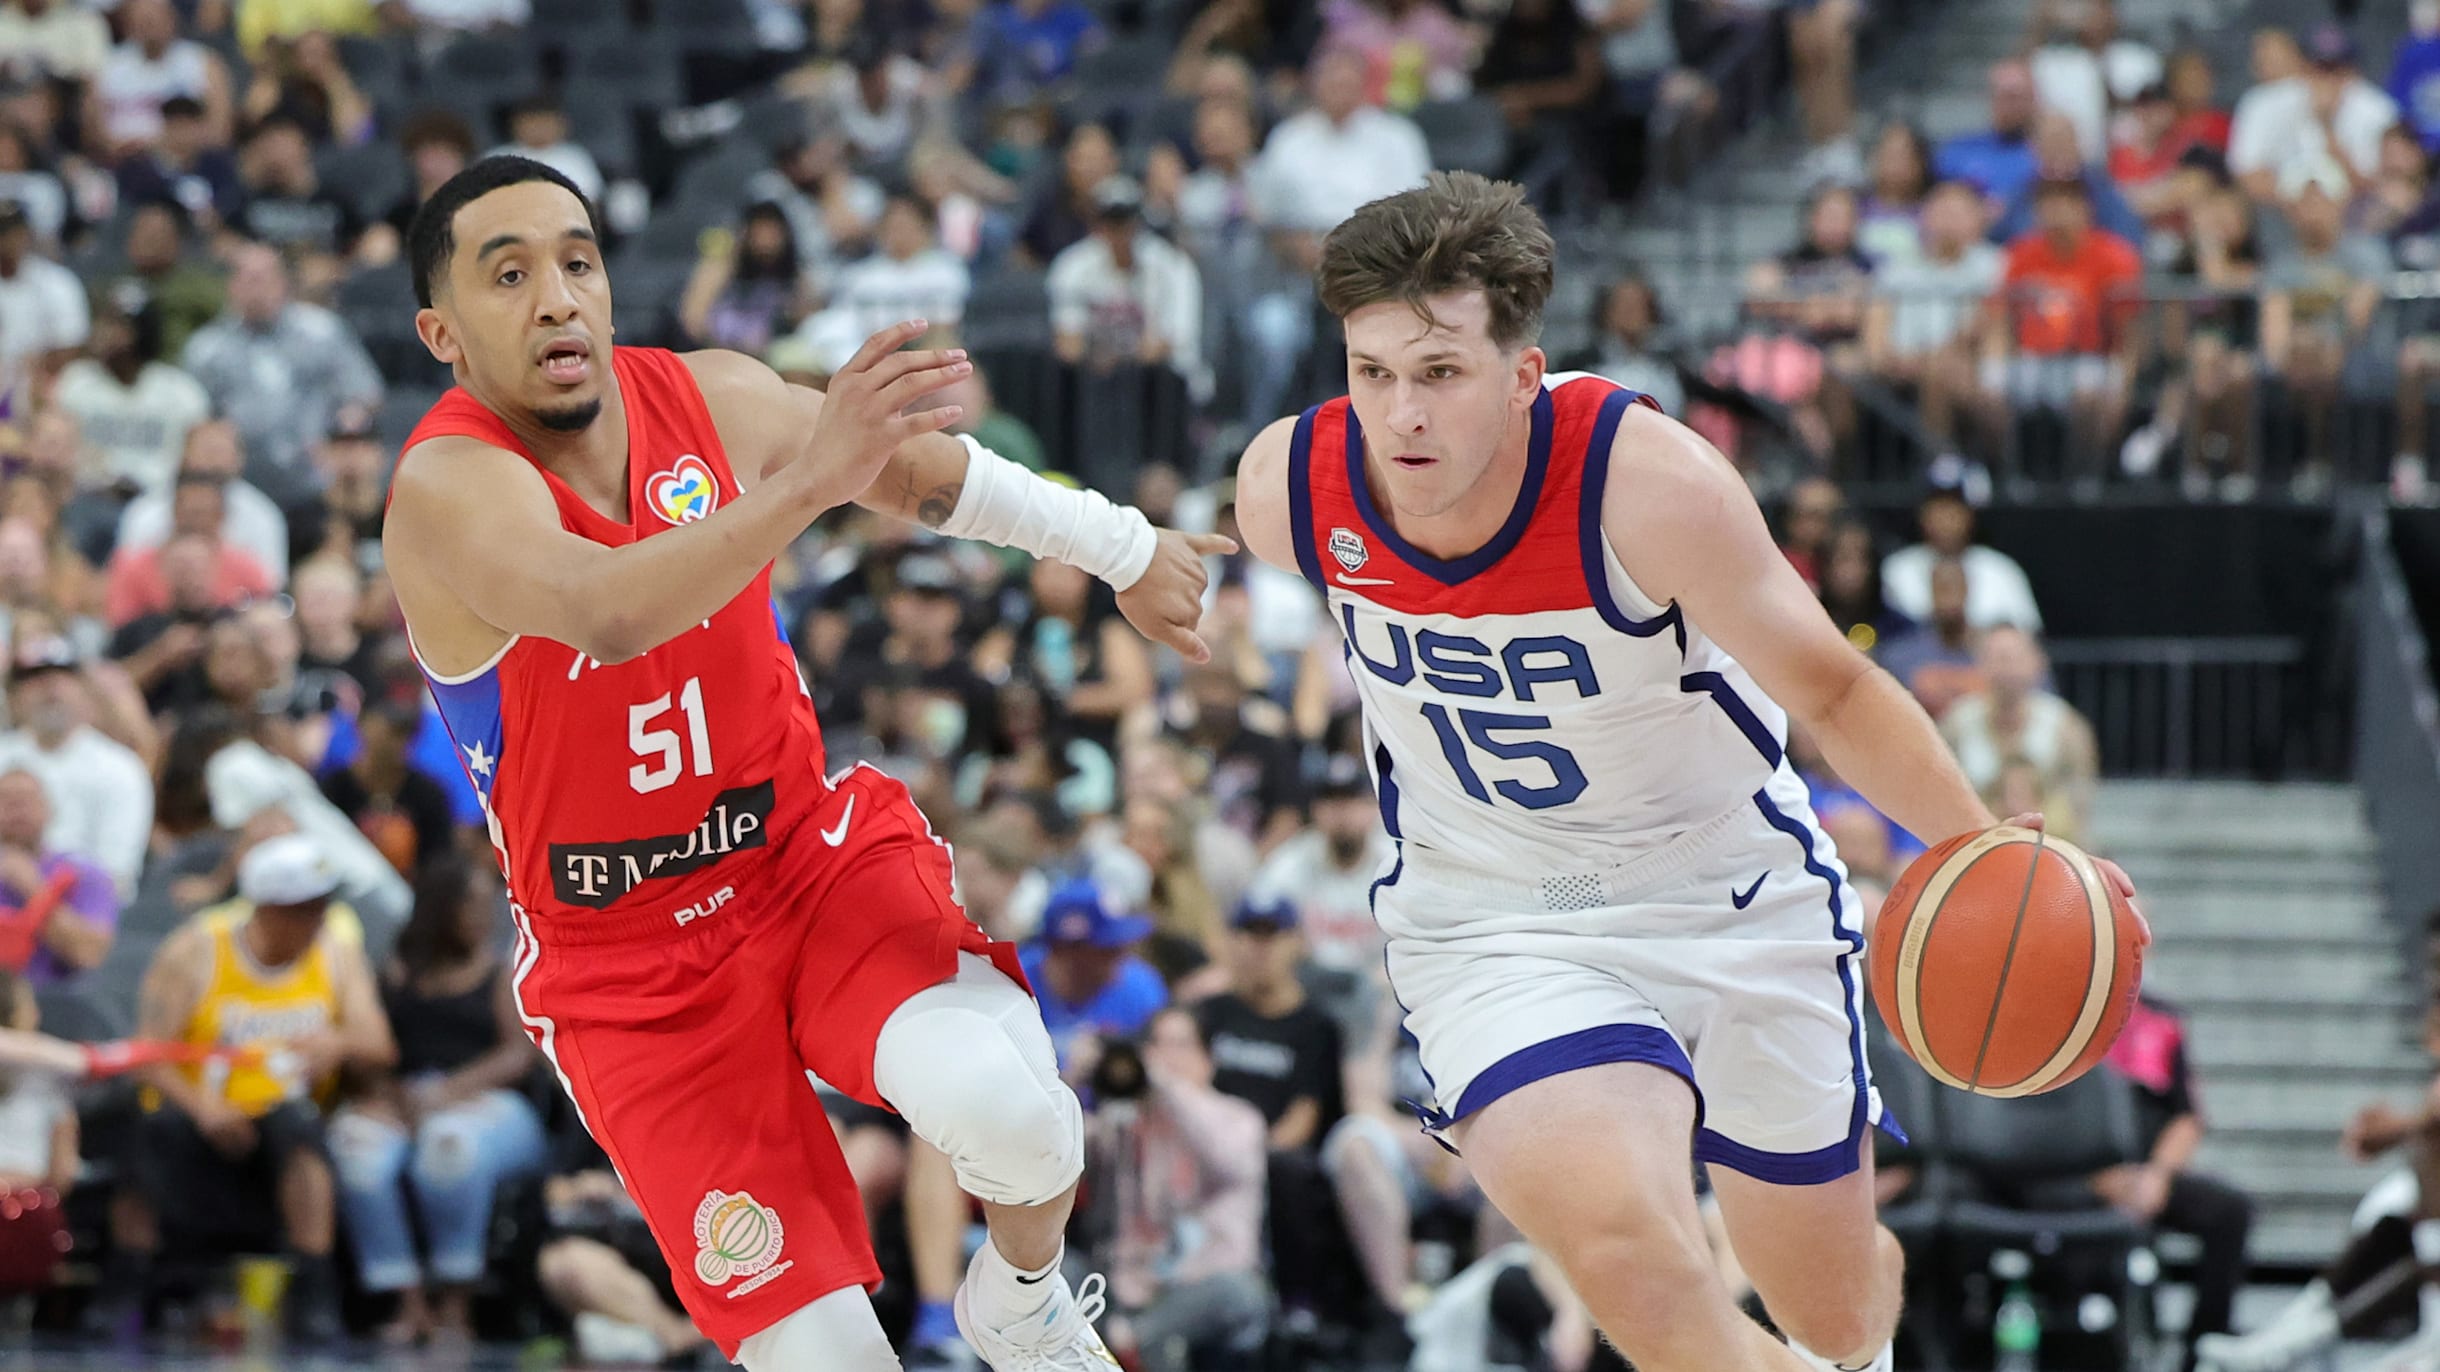 Is Lakers' Austin Reaves turning into a star?